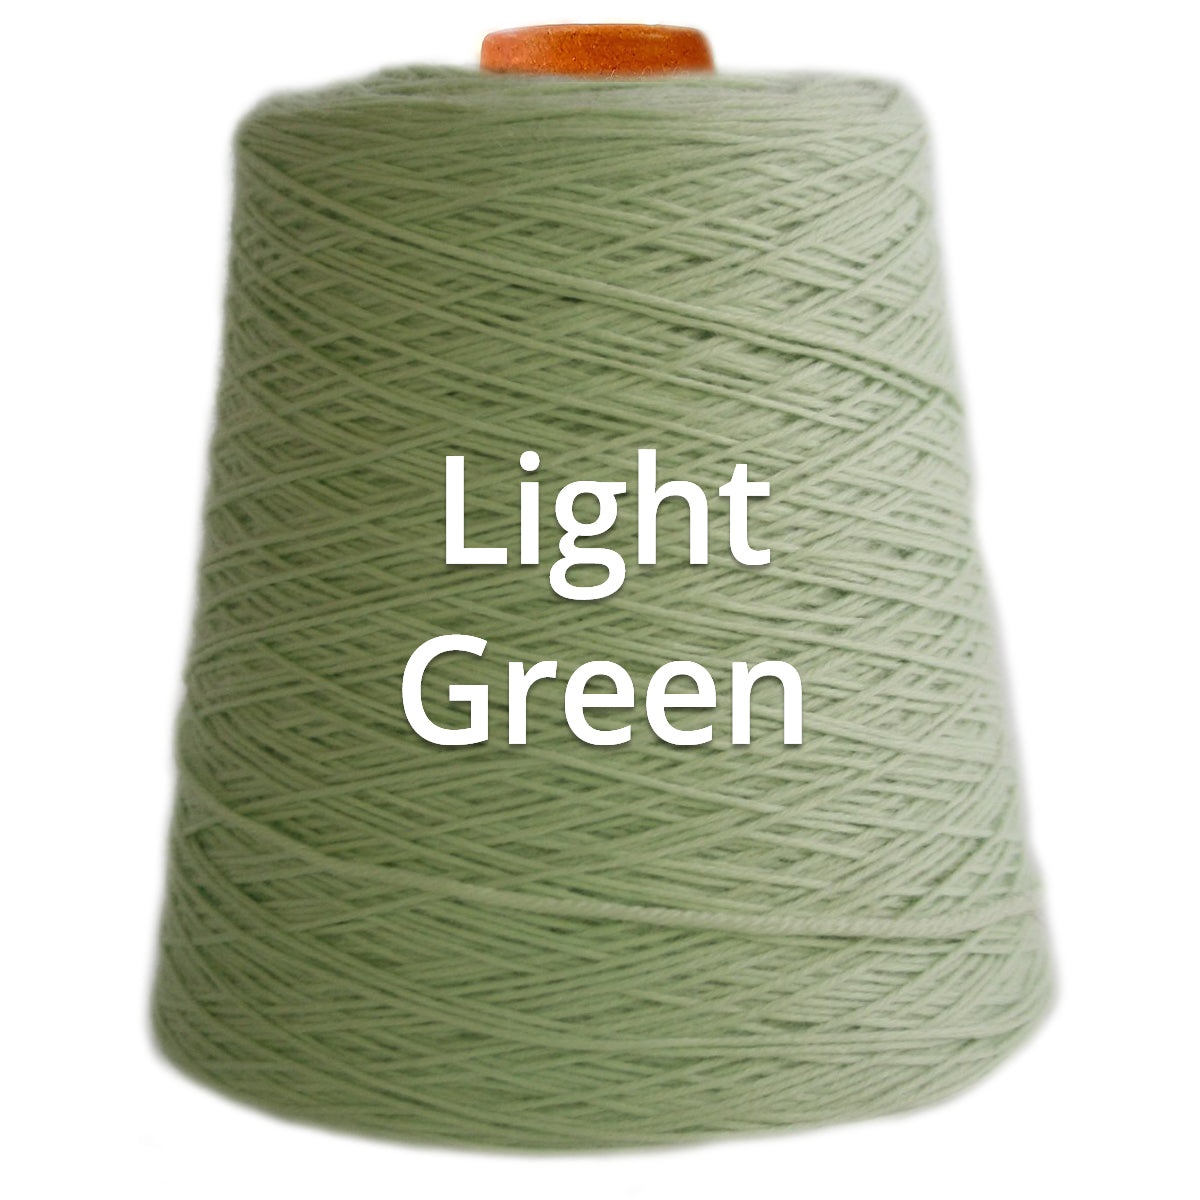 Light Green - Nundle Collection 12 ply Chaffey Yarn 400g Cone